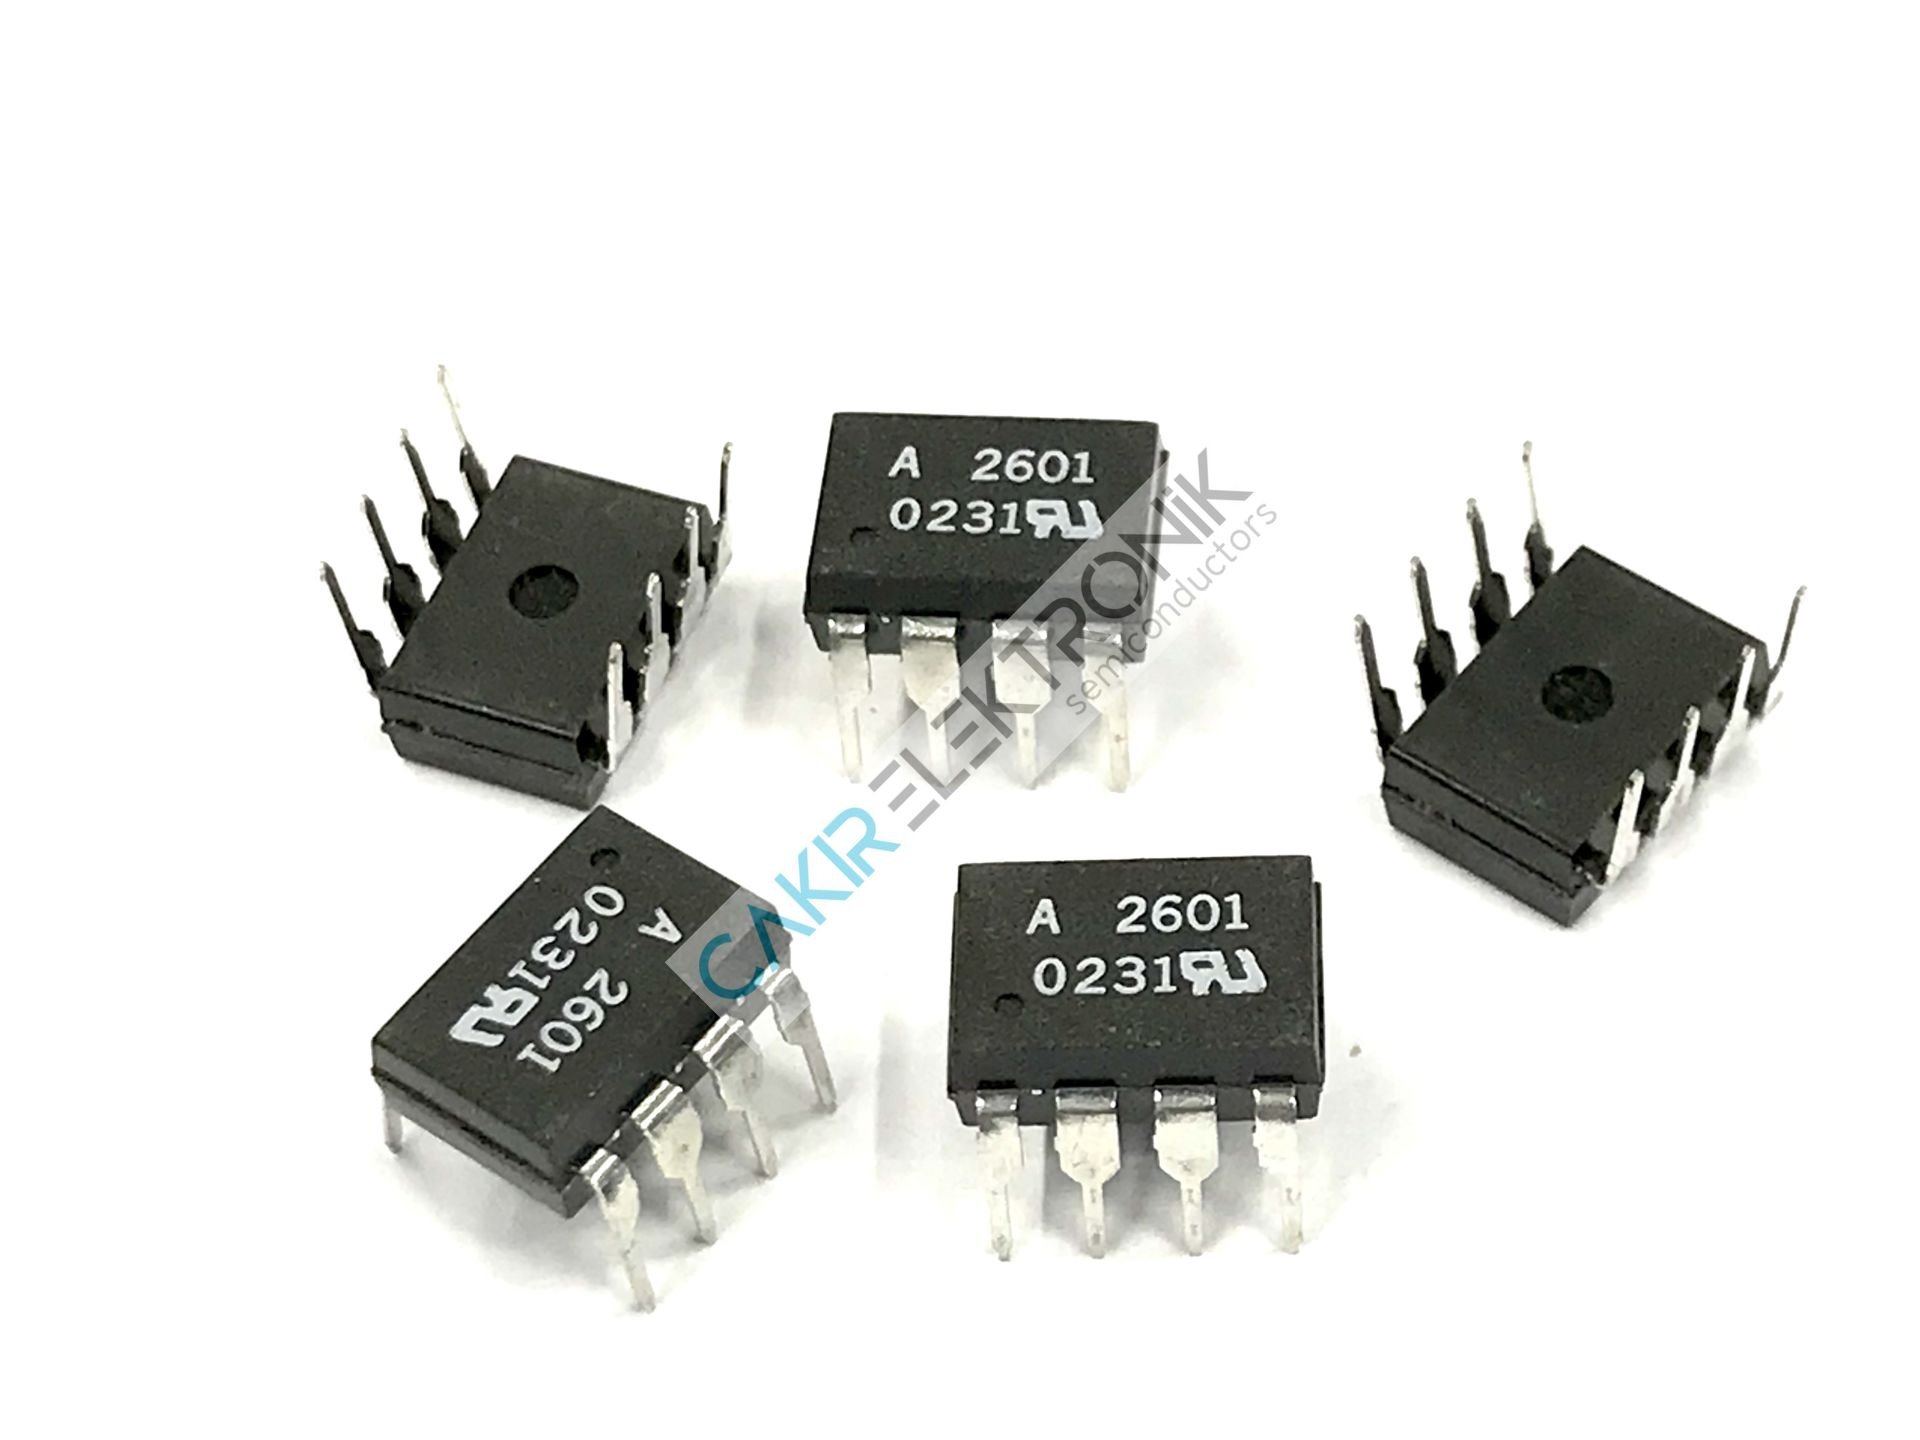 HCPL2601  - A2601 - HCPL-2601 - TLP2601 - High CMR, High Speed TTL Compatible Optocouplers